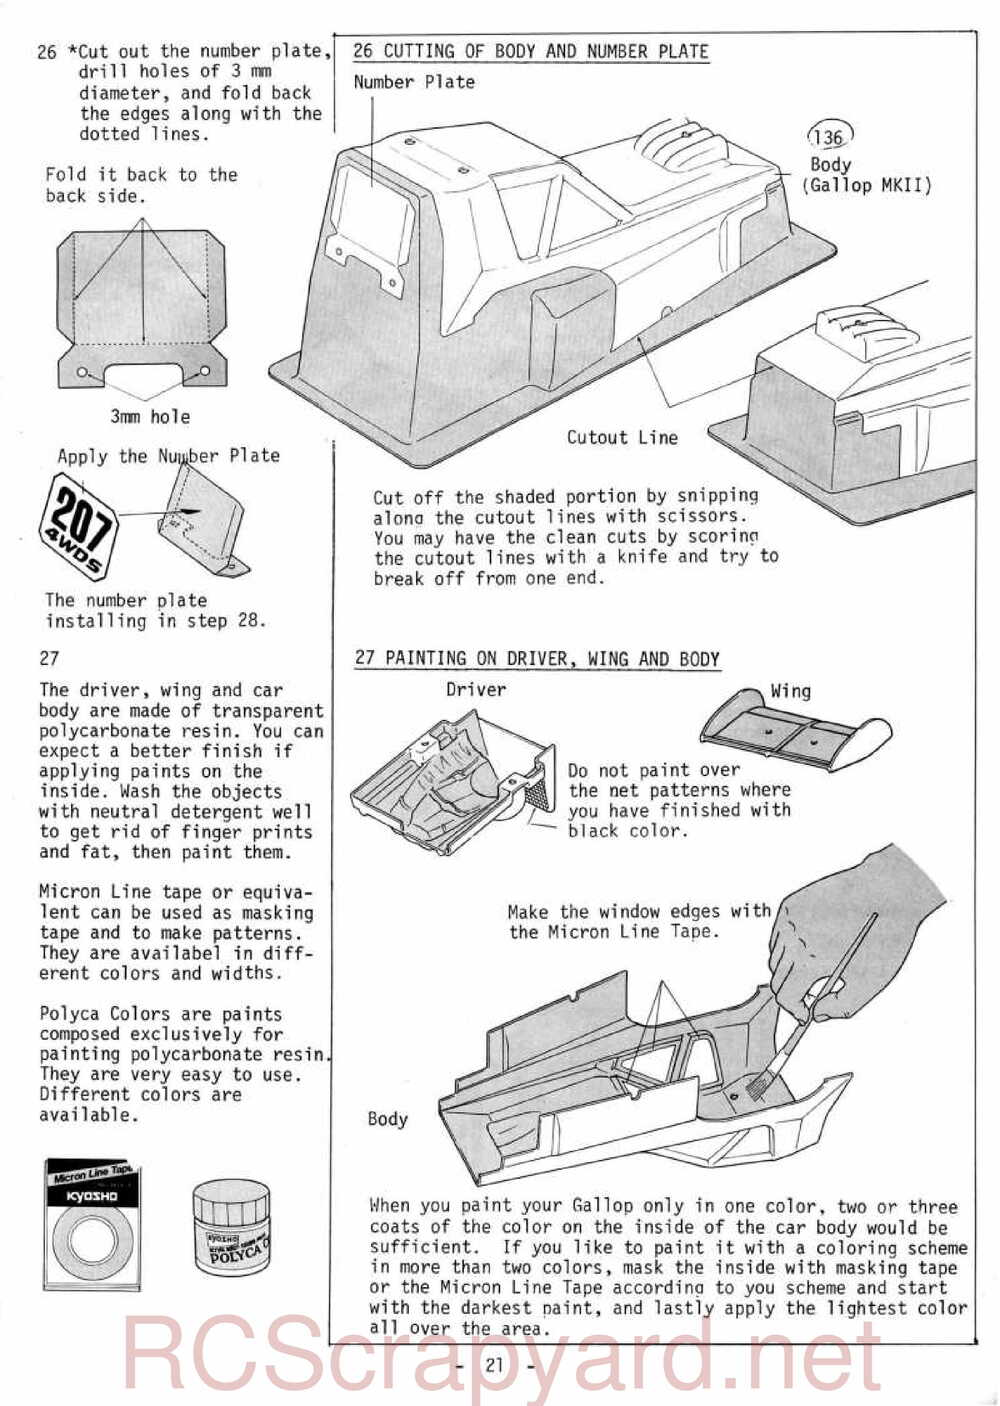 Kyosho - 3069 - Gallop MkII - Manual - Page 21